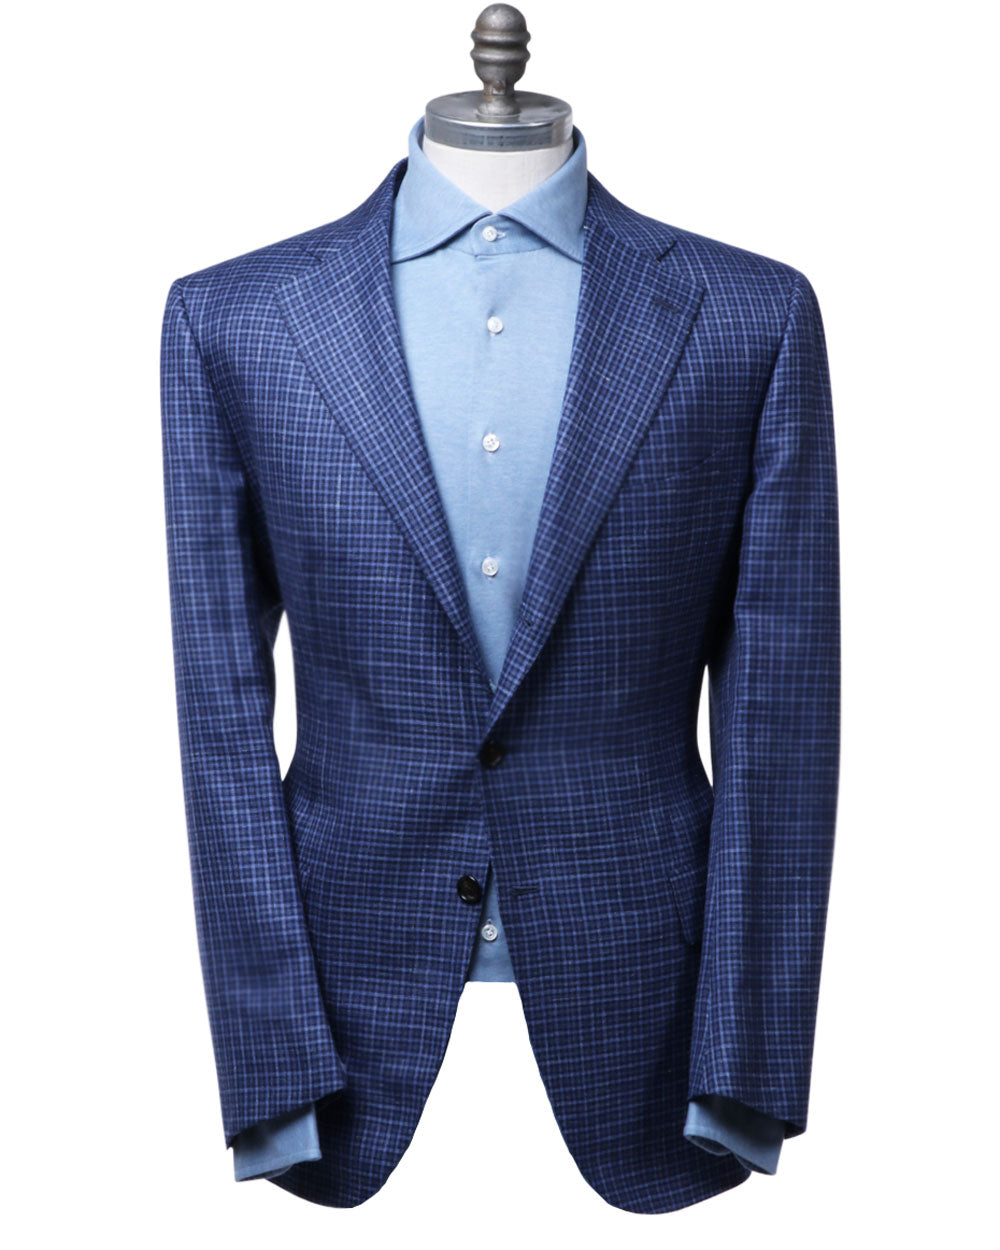 Blue and Navy Check Sportcoat